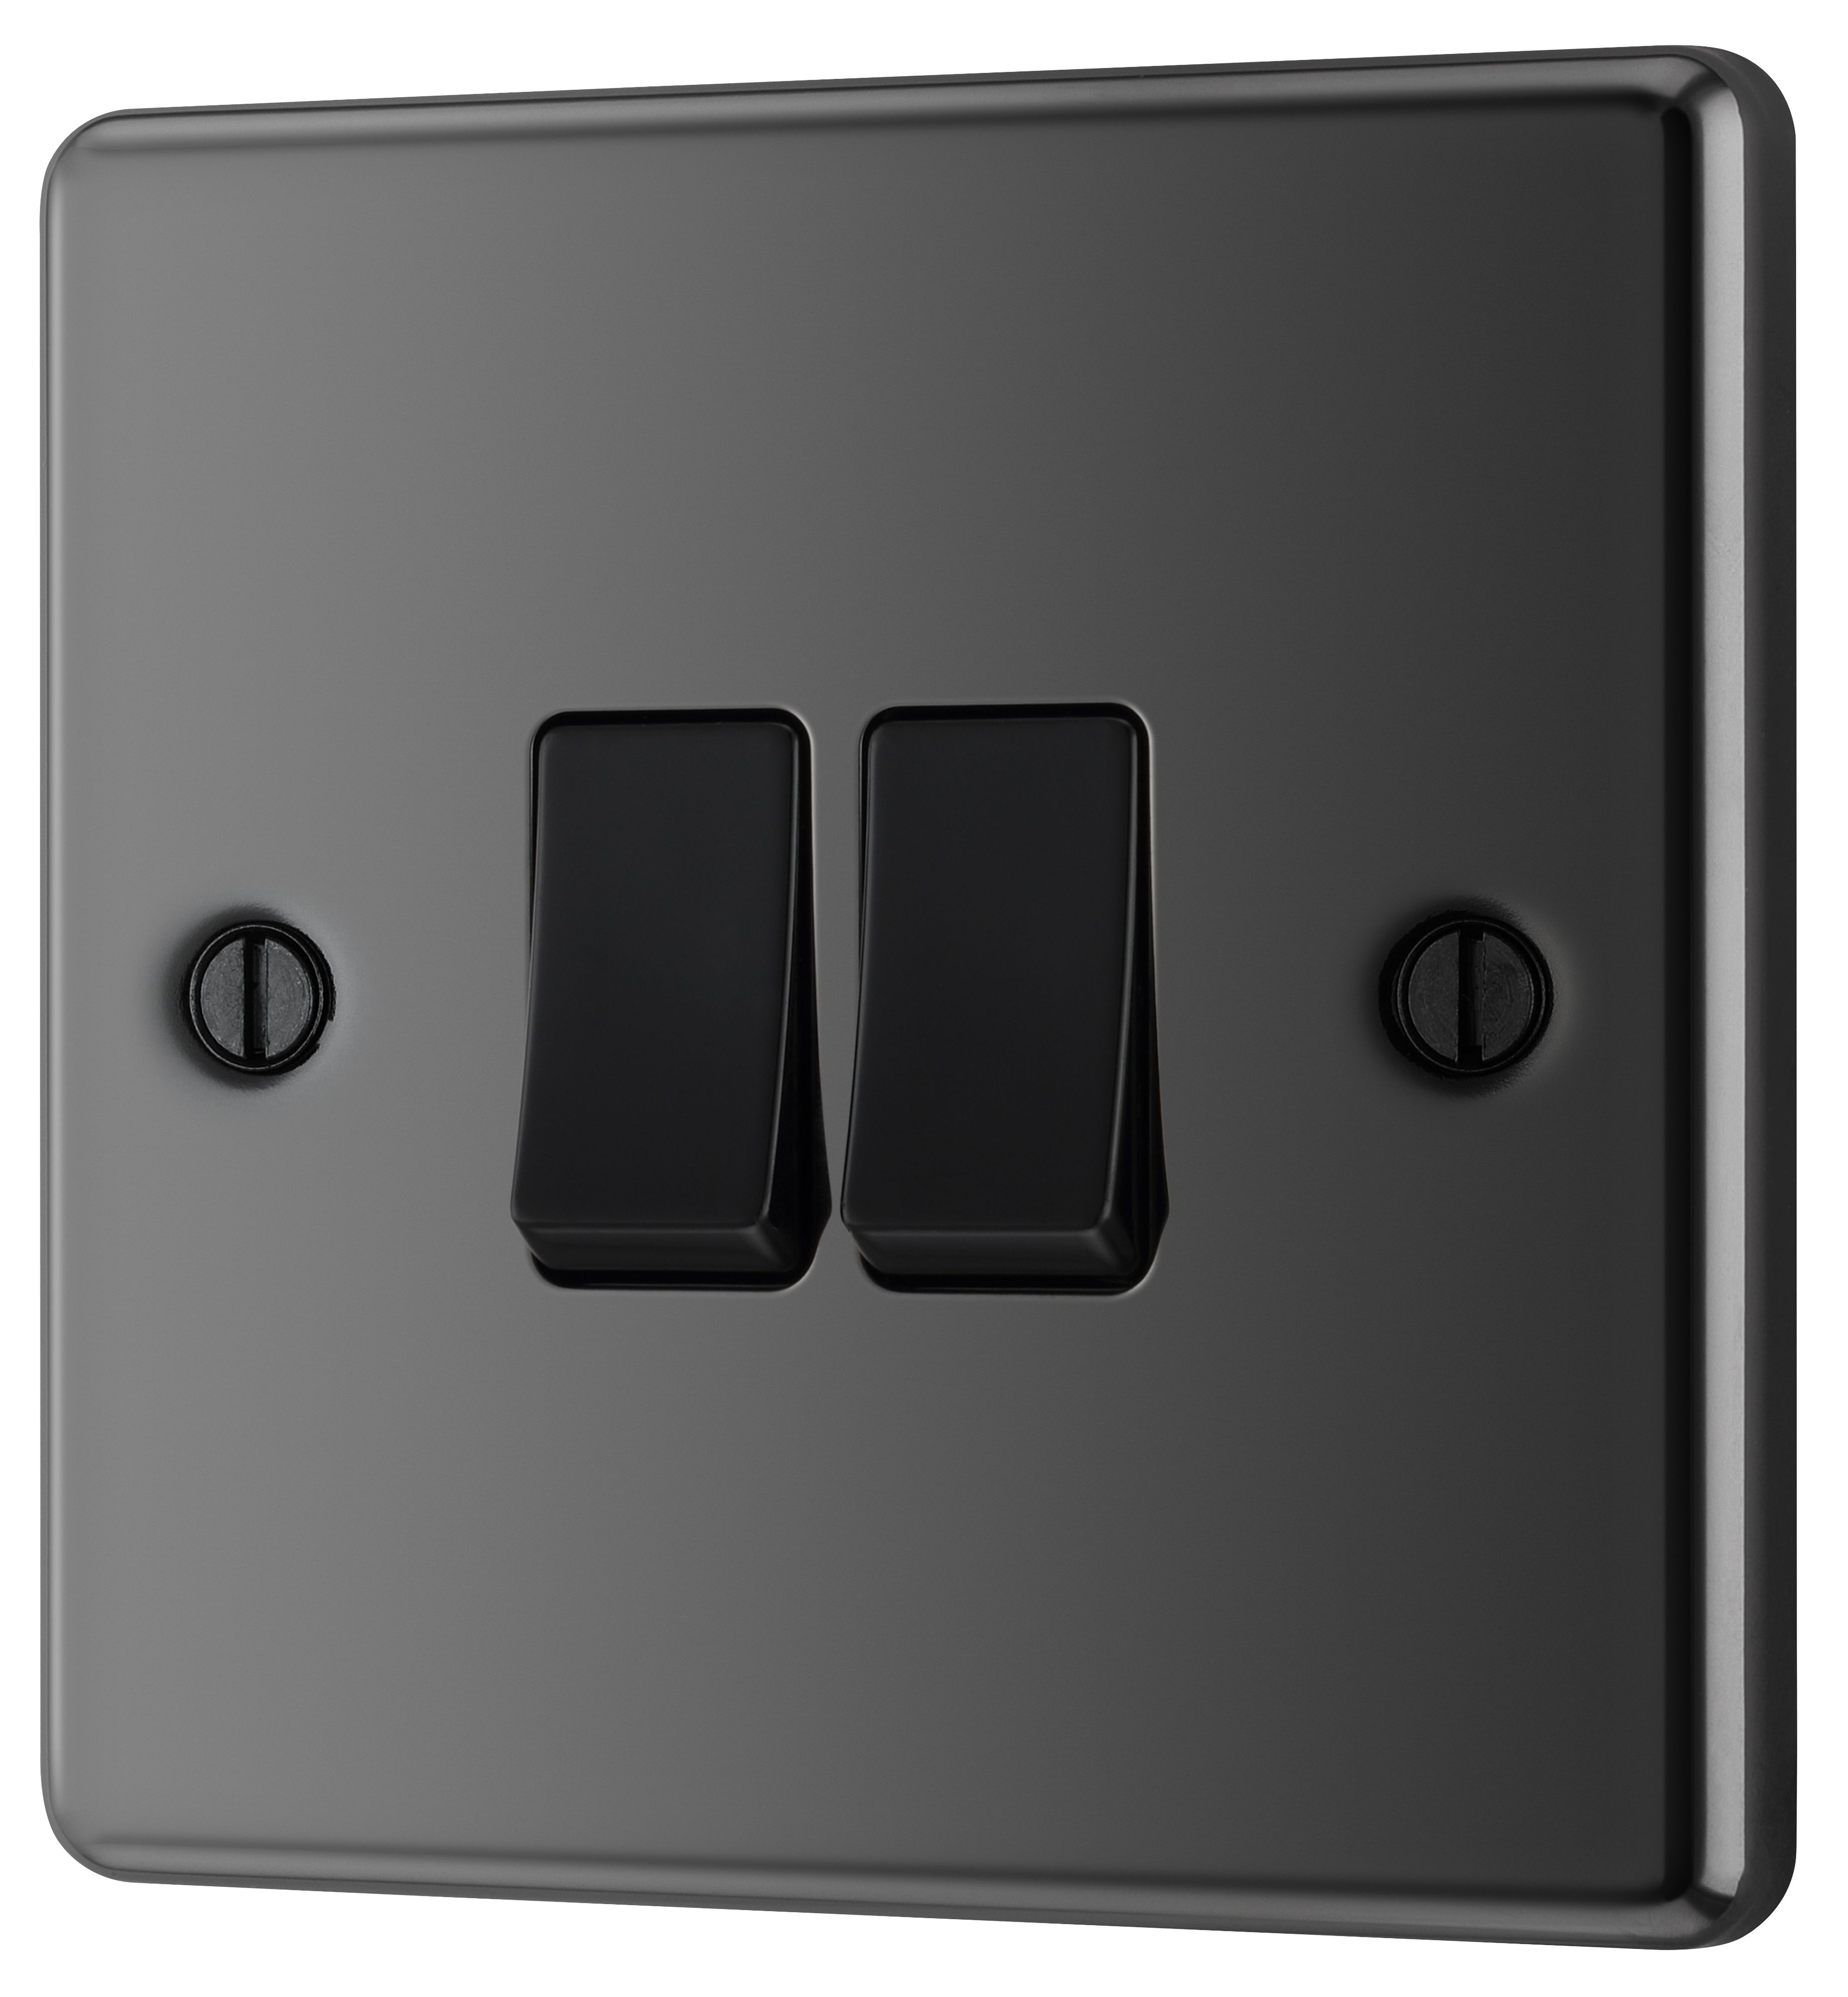 Black Nickel Single Light Switch Electrical Switches